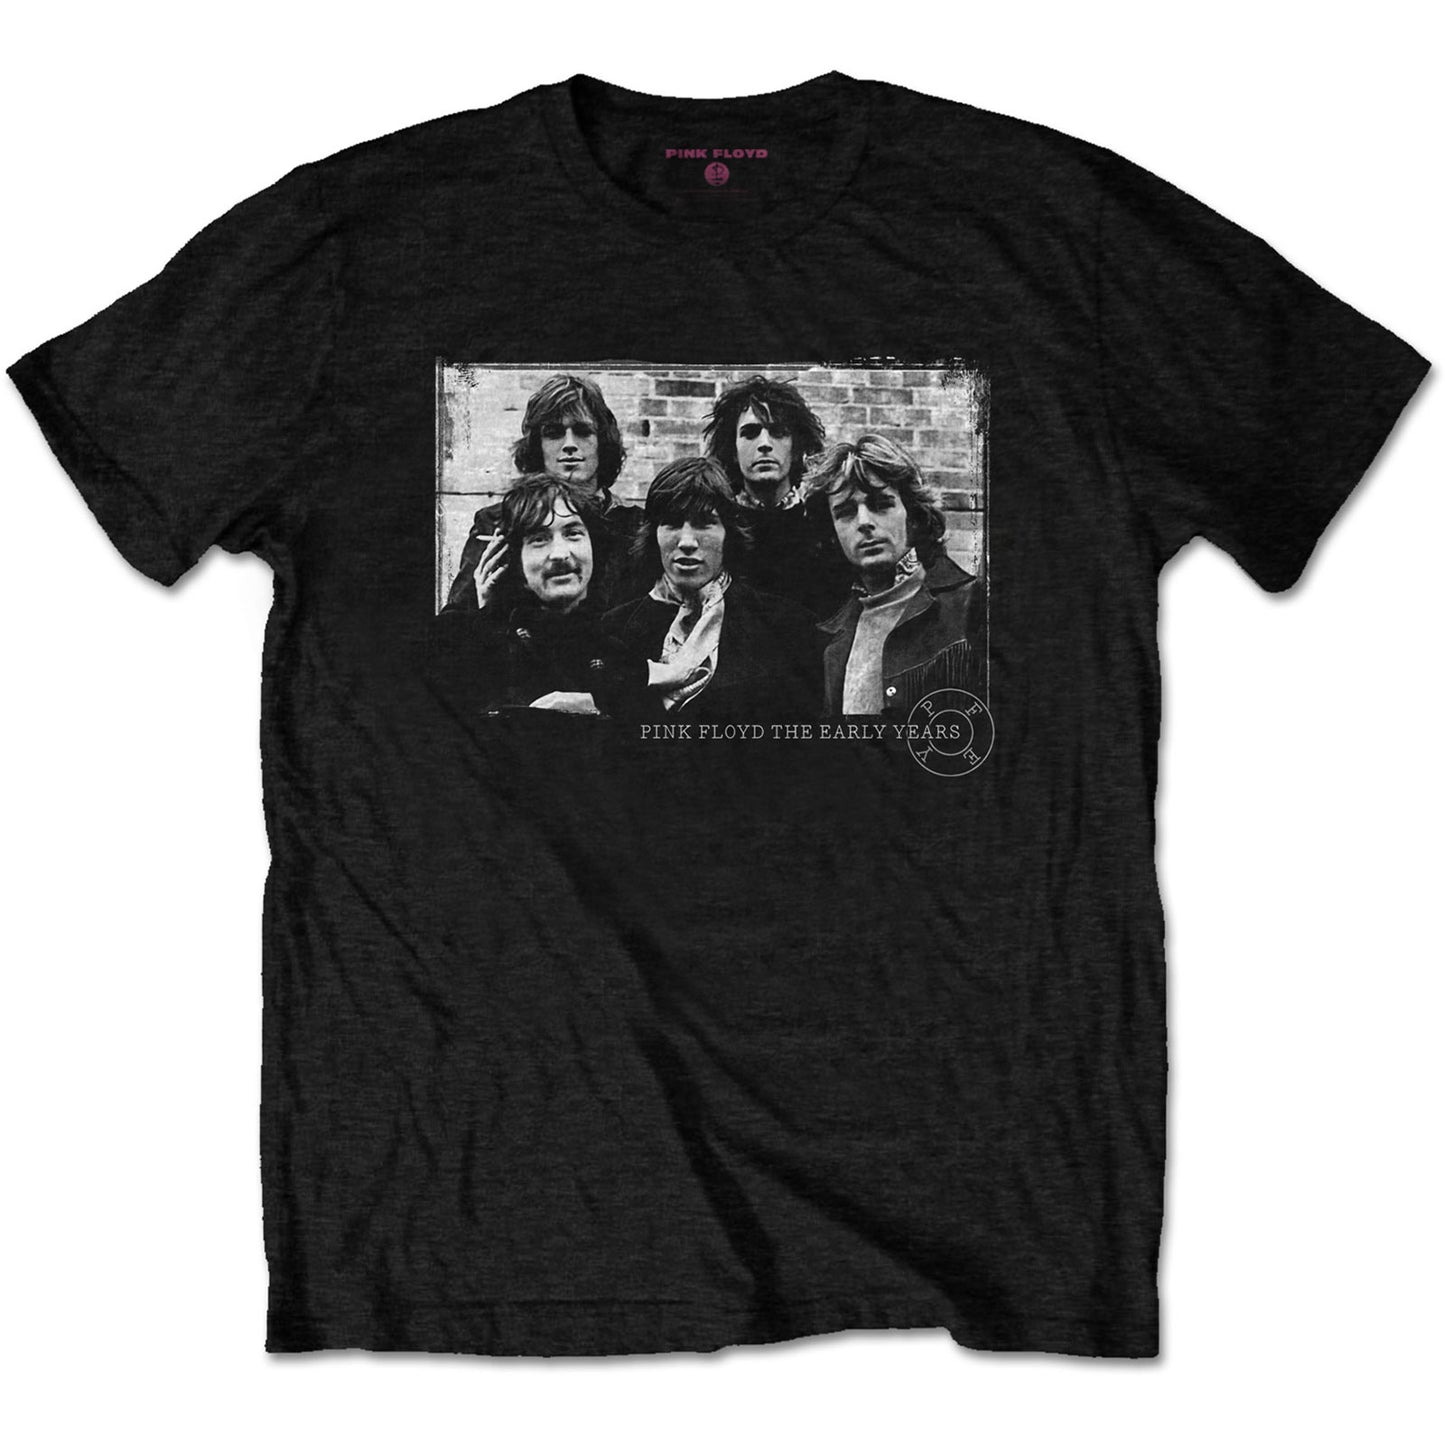 Pink Floyd T-Shirt: The Early Years 5 Piece